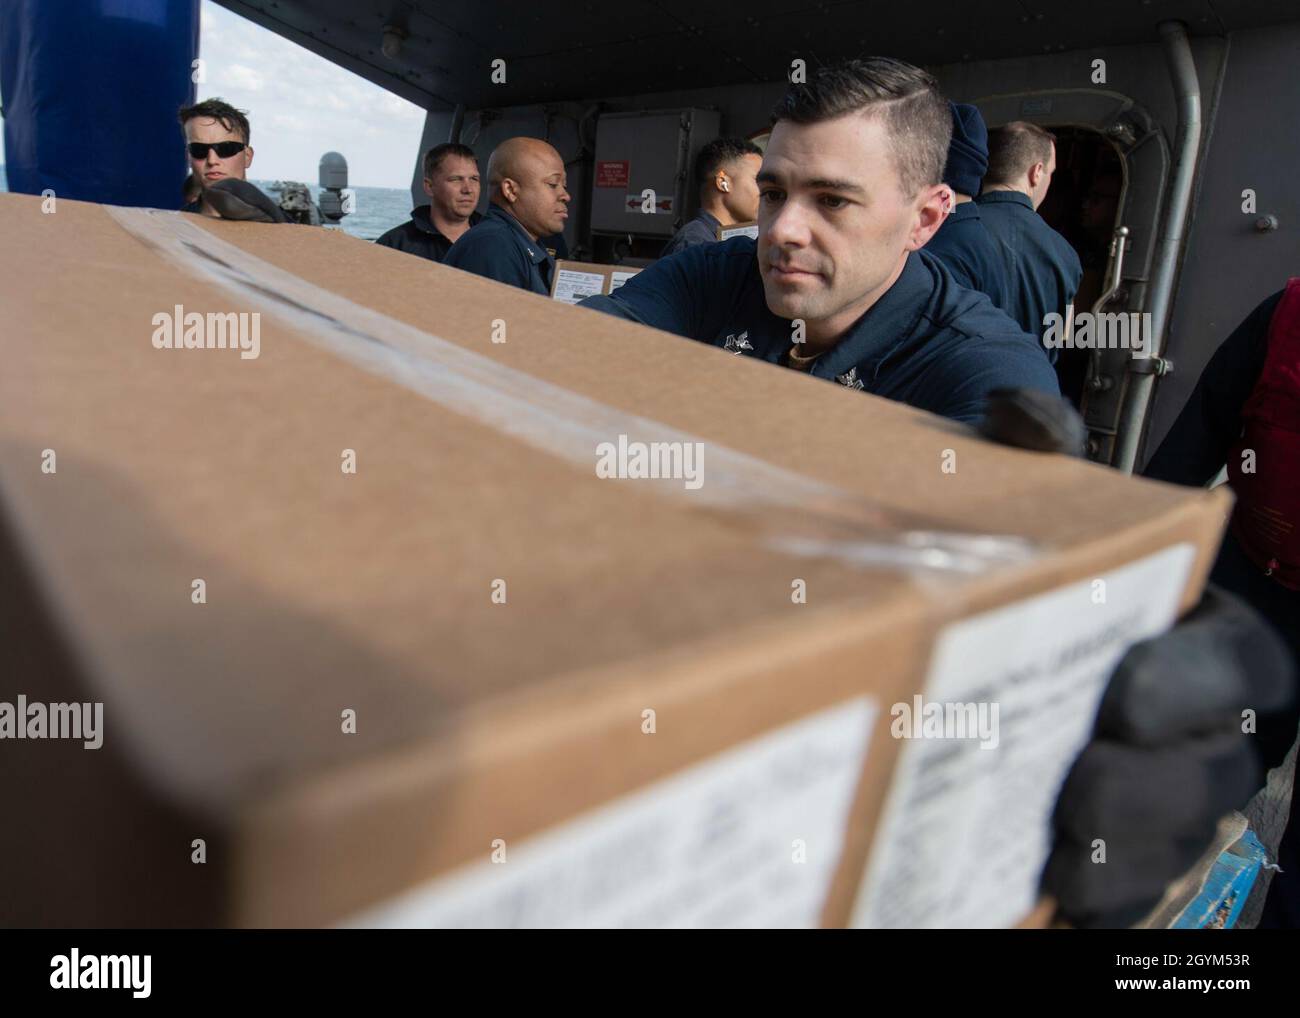 ARABIAN GULF (Jan. 27, 2020) - Logistics Specialist 1st Class Bradley Rash removes a box from a pallet to pass along to the working party aboard the guided-missile destroyer USS Carney (DDG 64) during a replenishment-at-sea with the fleet replenishment oiler USNS Walter S. Diehl (T-AO-193), Jan. 27, 2020. Carney is deployed to the U.S. 5th Fleet area of operations in support of naval operations to ensure maritime stability and security in the Central Region, connecting the Mediterranean and Pacific through the Western Indian Ocean and three strategic choke points. (U.S. Navy photo by Mass Comm Stock Photo